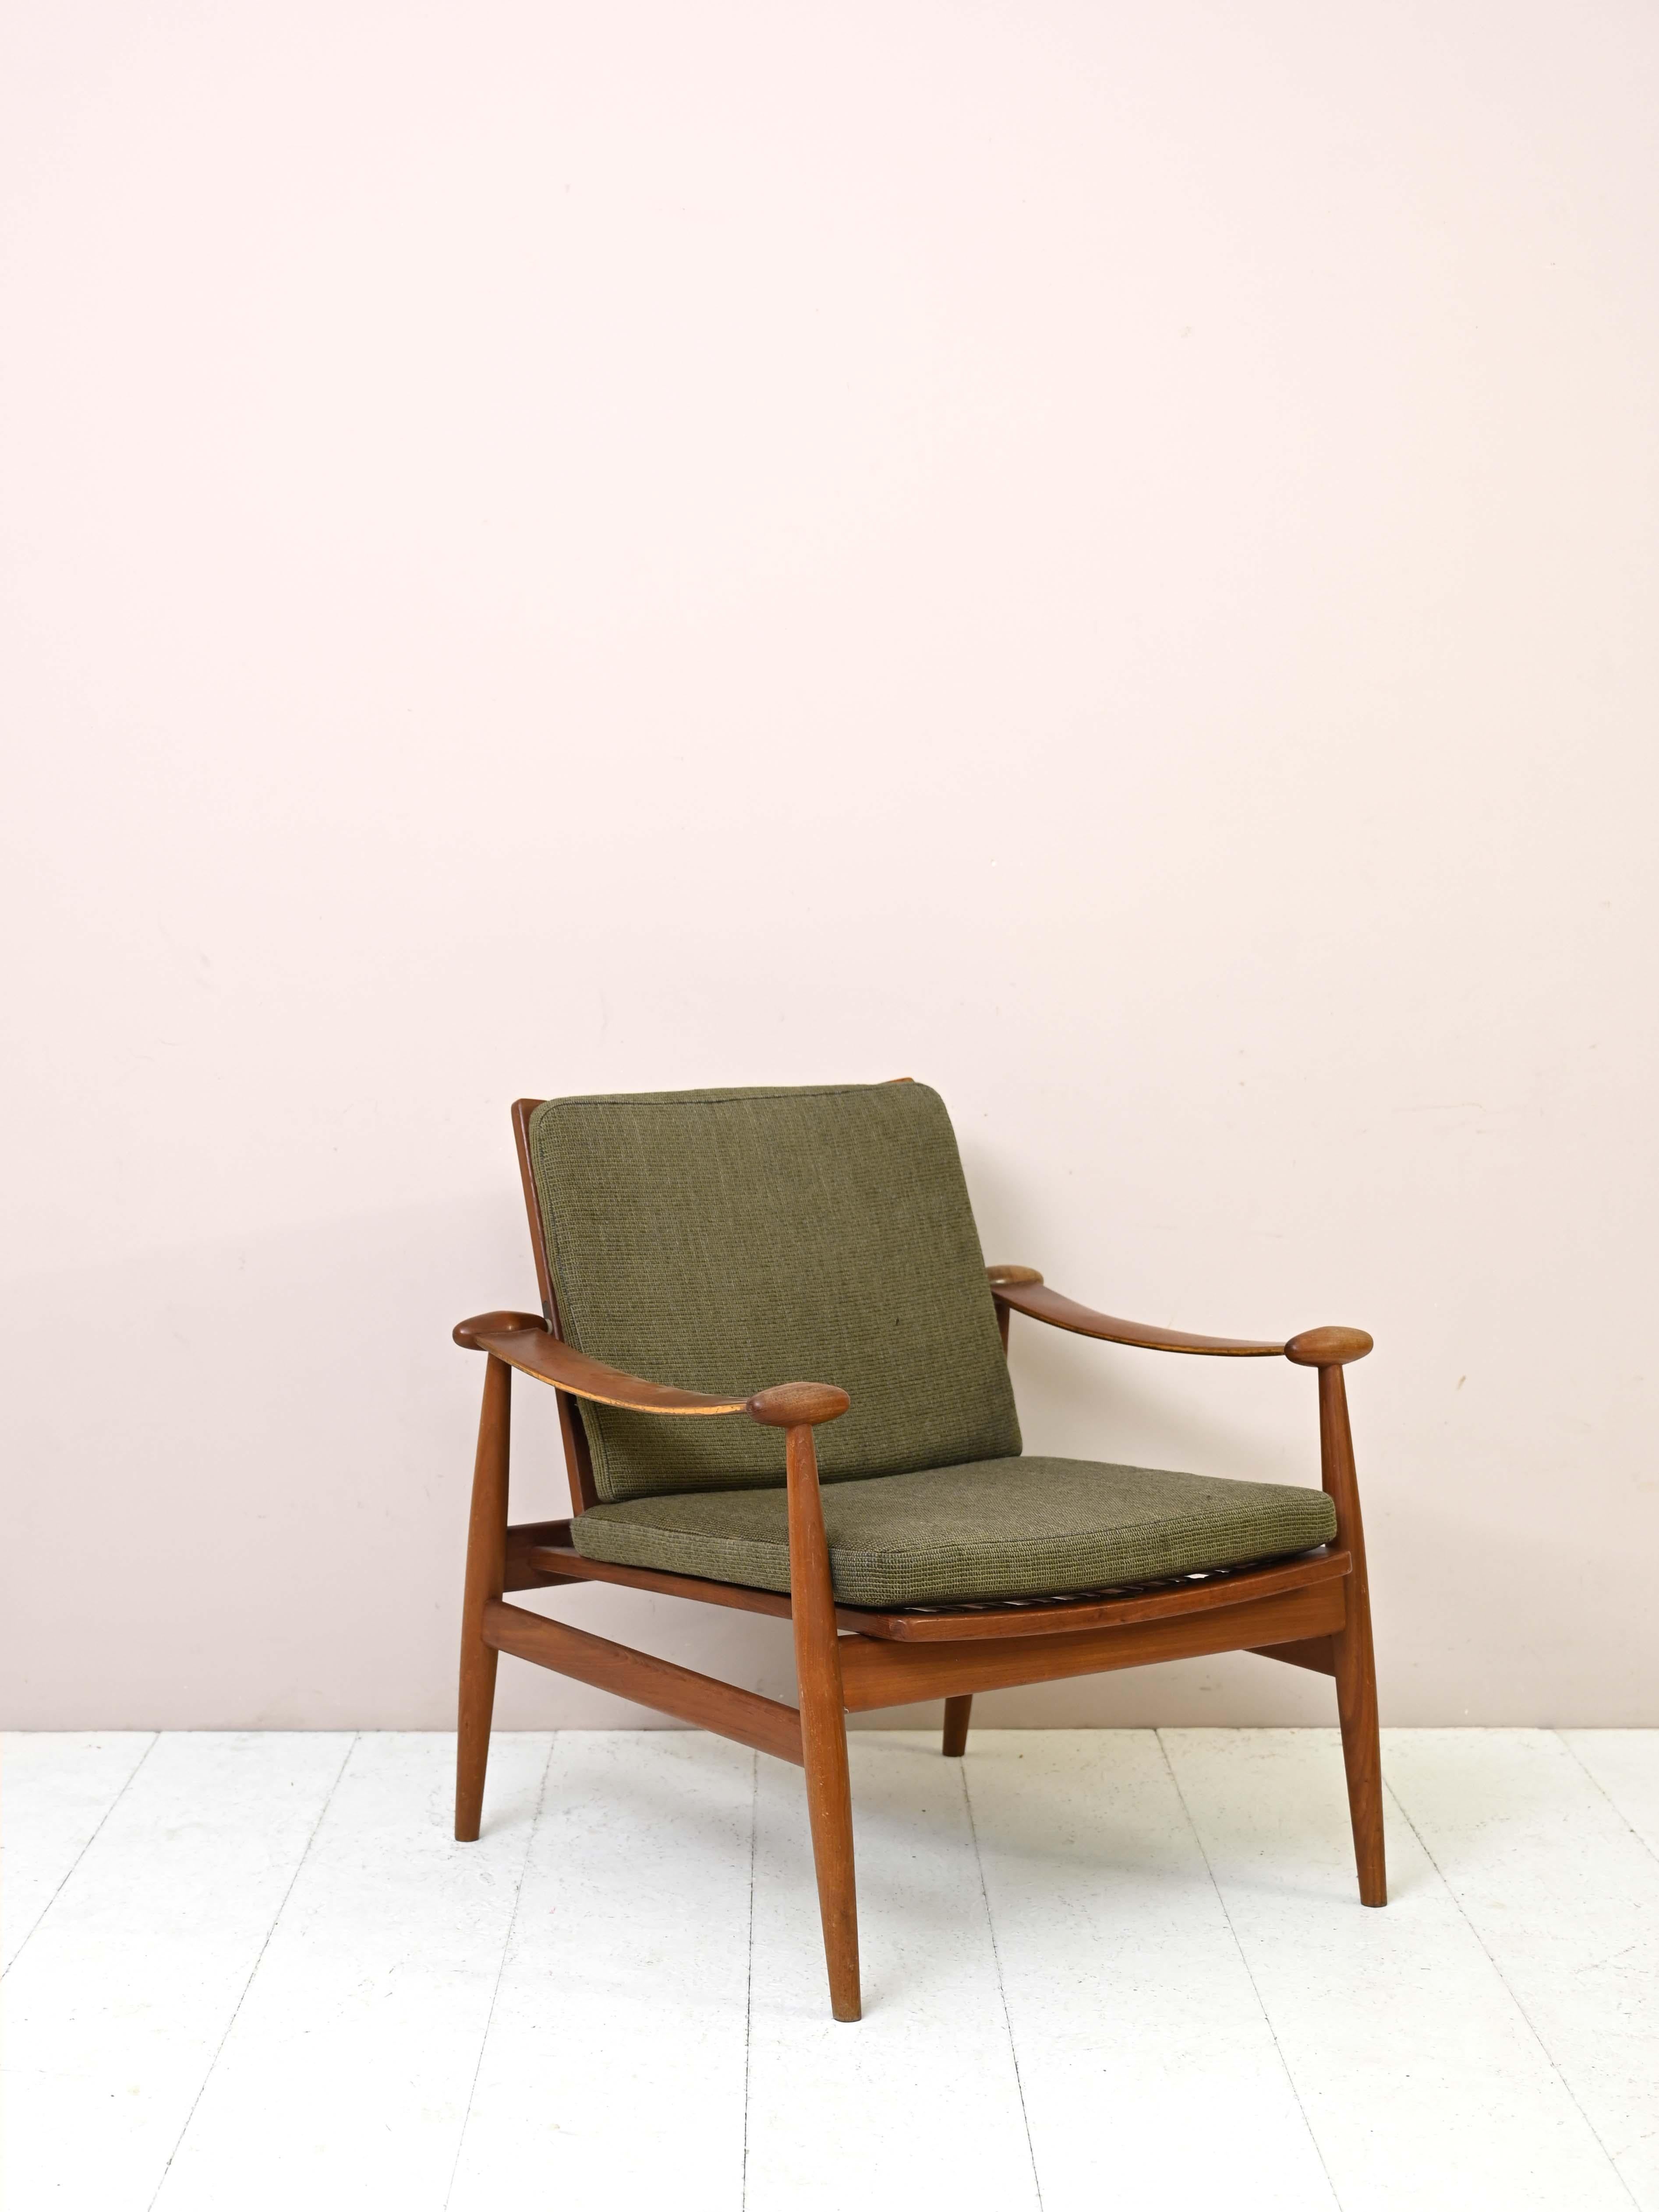 Armchair model FD 133 original vintage.

This uniquely designed and elegant armchair was designed by Finn Juhl in the 1960s.
The frame is solid teak wood and the upholstered cushions have the original vintage fabric.
The distinguishing feature